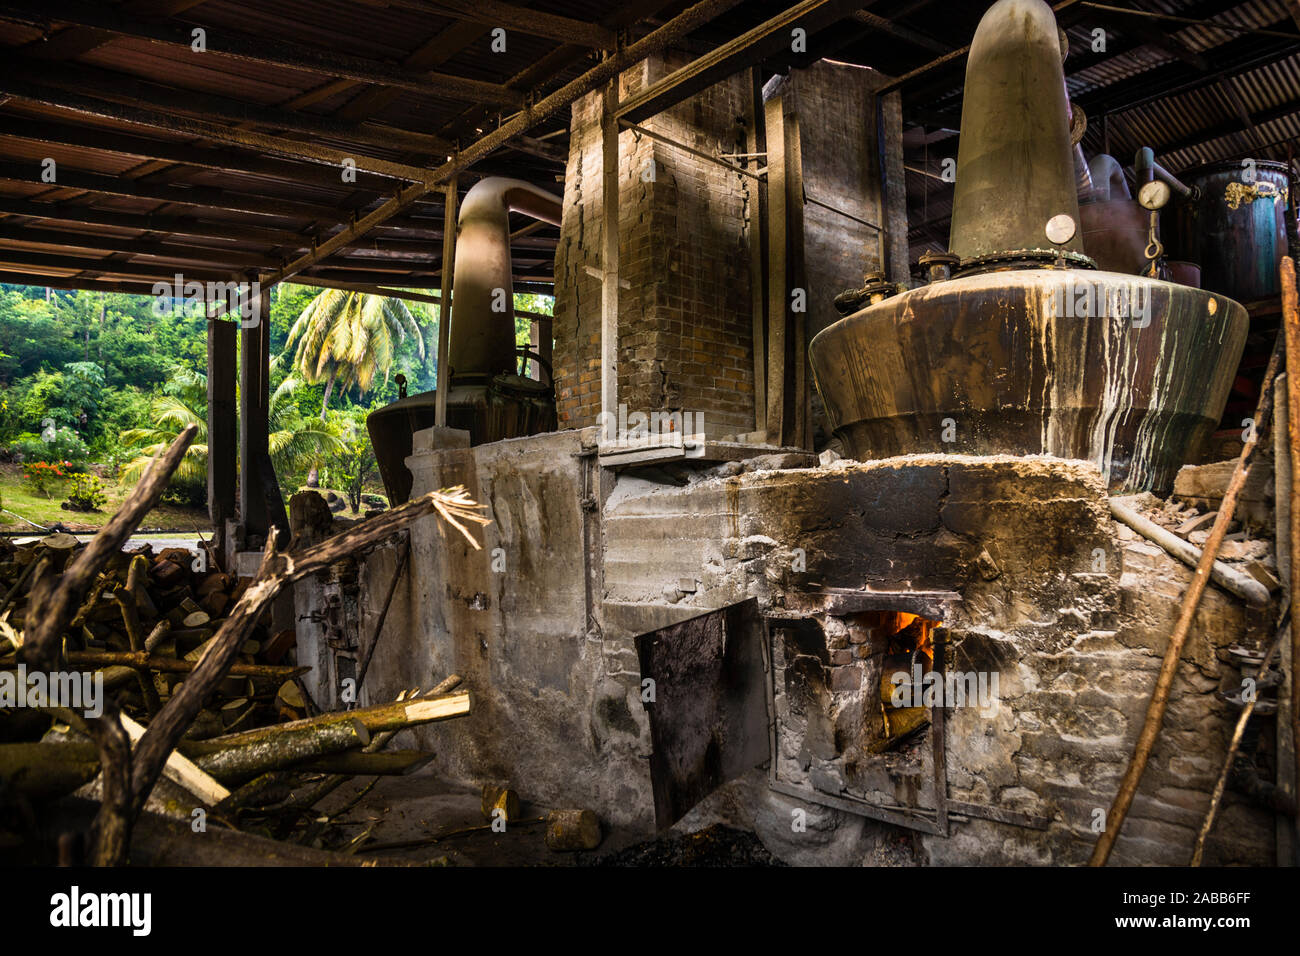 Antoine Rivers Rum Distillery, Saint Patrick, Grenada. The wood fire blazes under the boiling flask. The ancient safety regulations are probably still sufficient Stock Photo